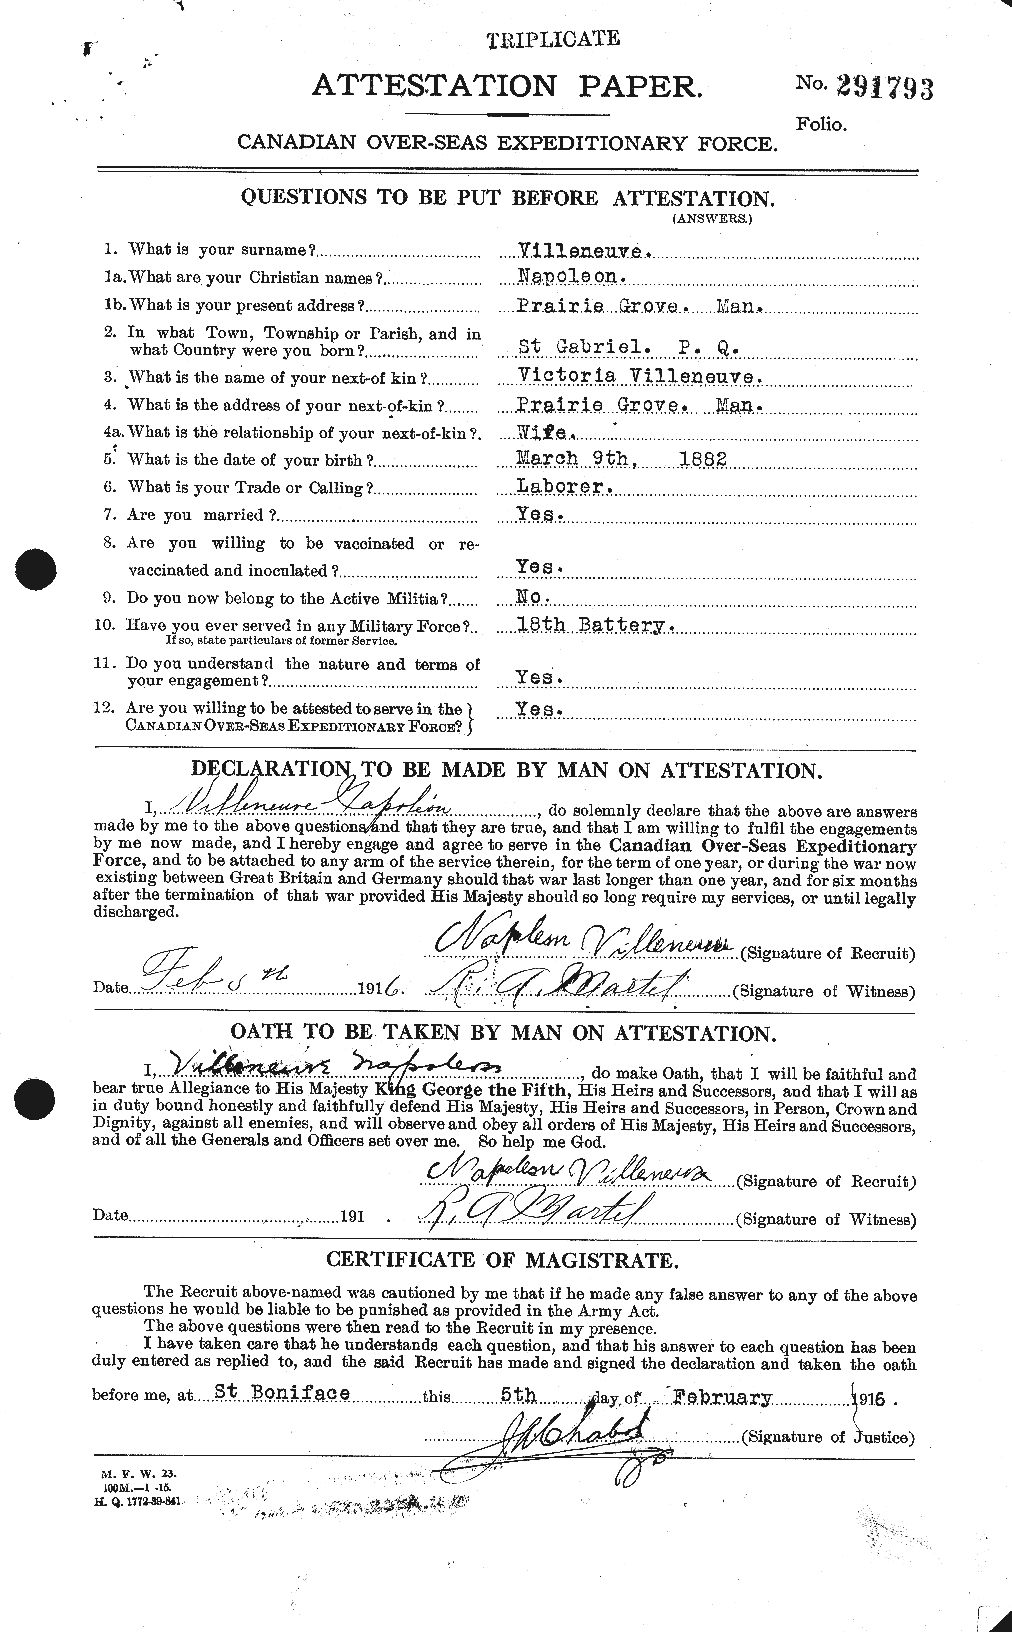 Personnel Records of the First World War - CEF 653867a